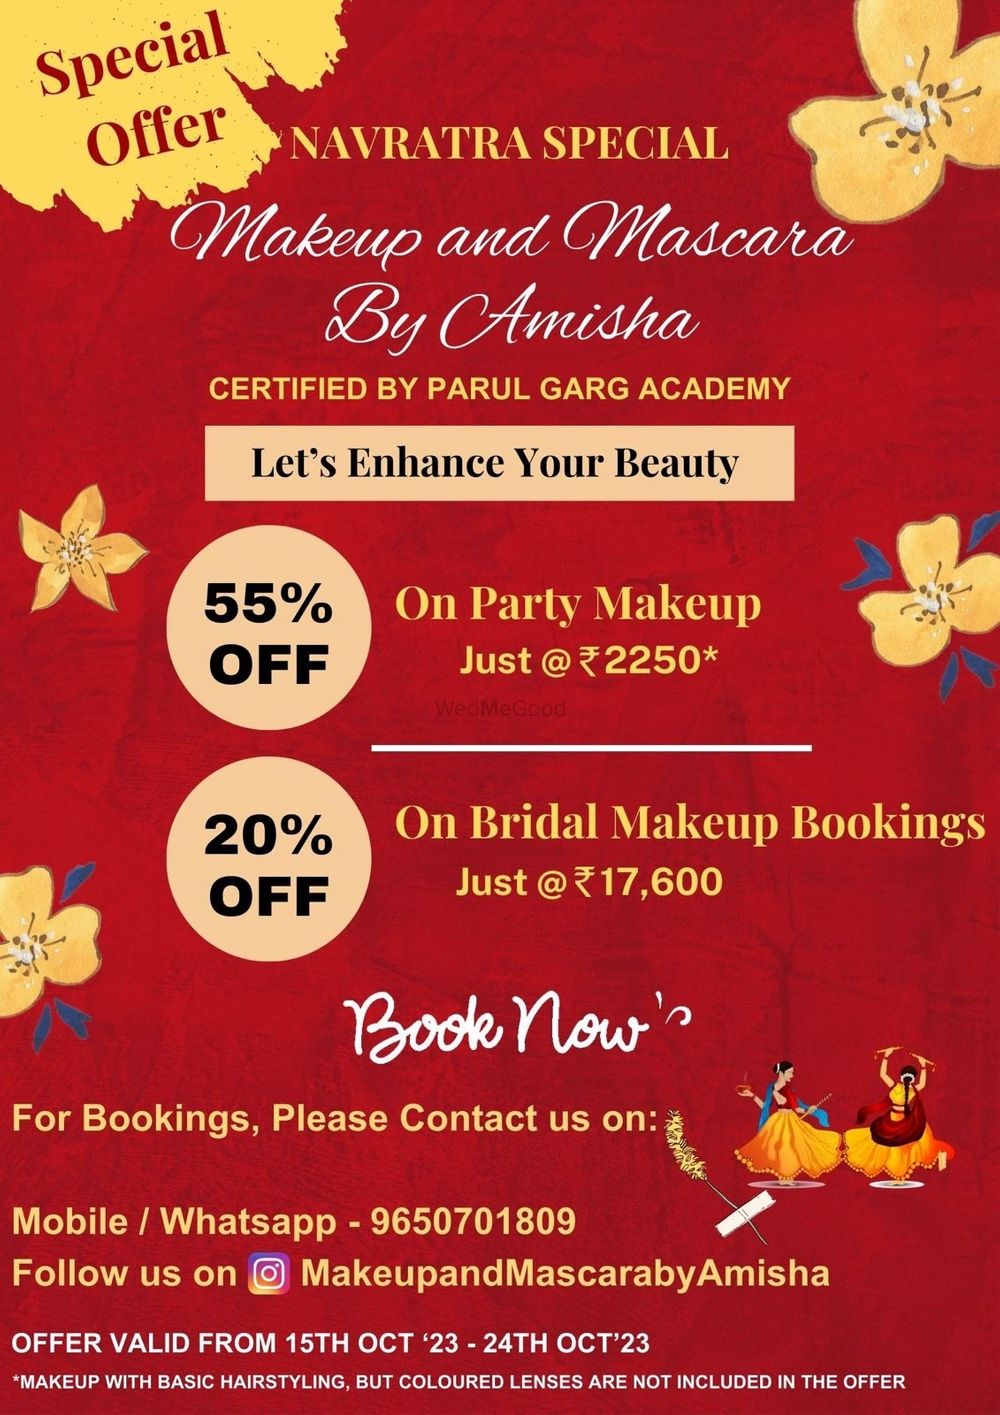 Photo From Offers - By Makeup and Mascara by Amisha